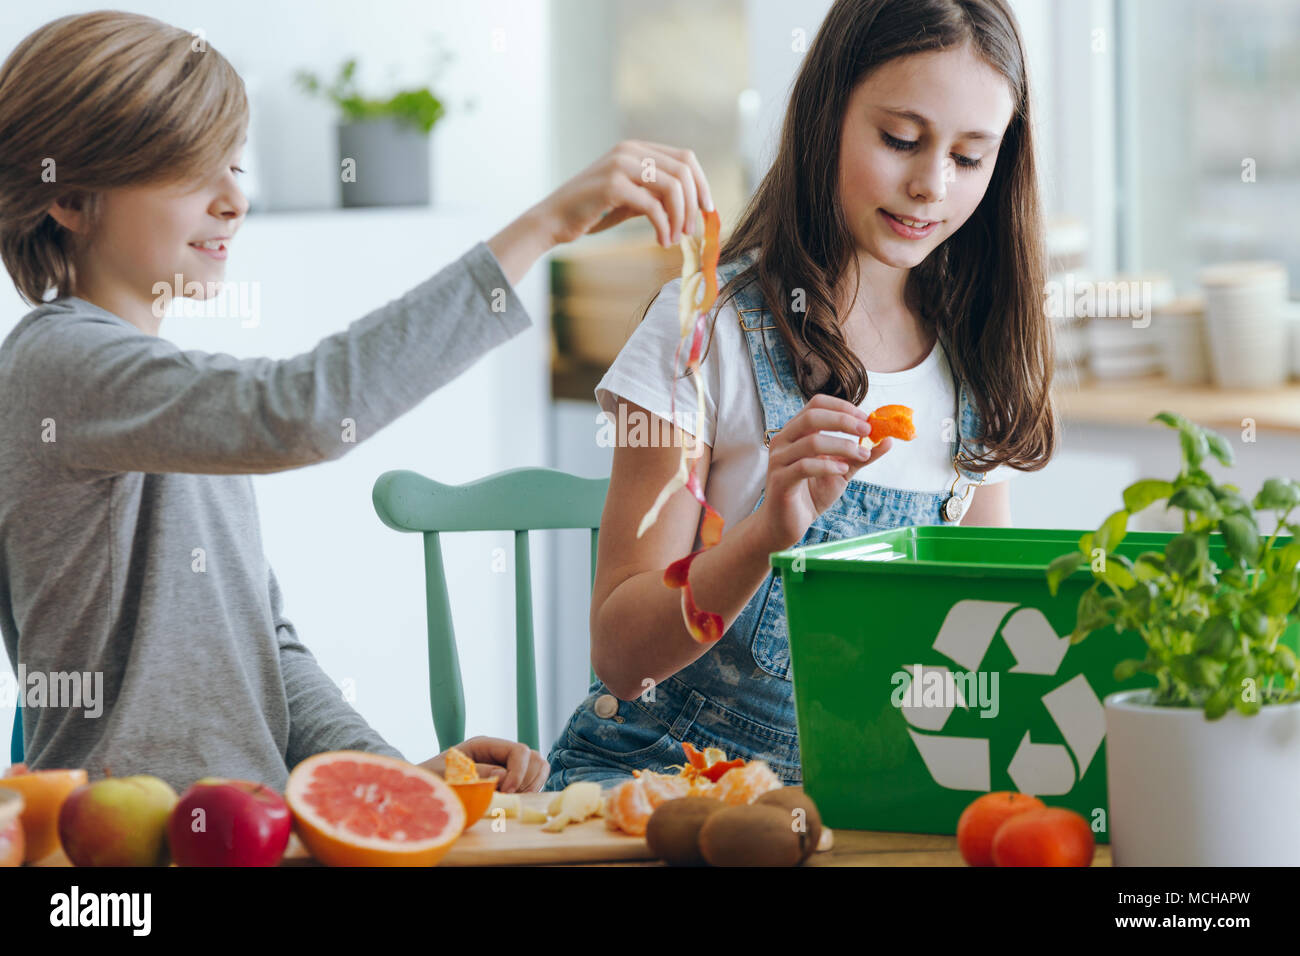 Girl and boy trowing out fruits waste into green recycling container Stock Photo